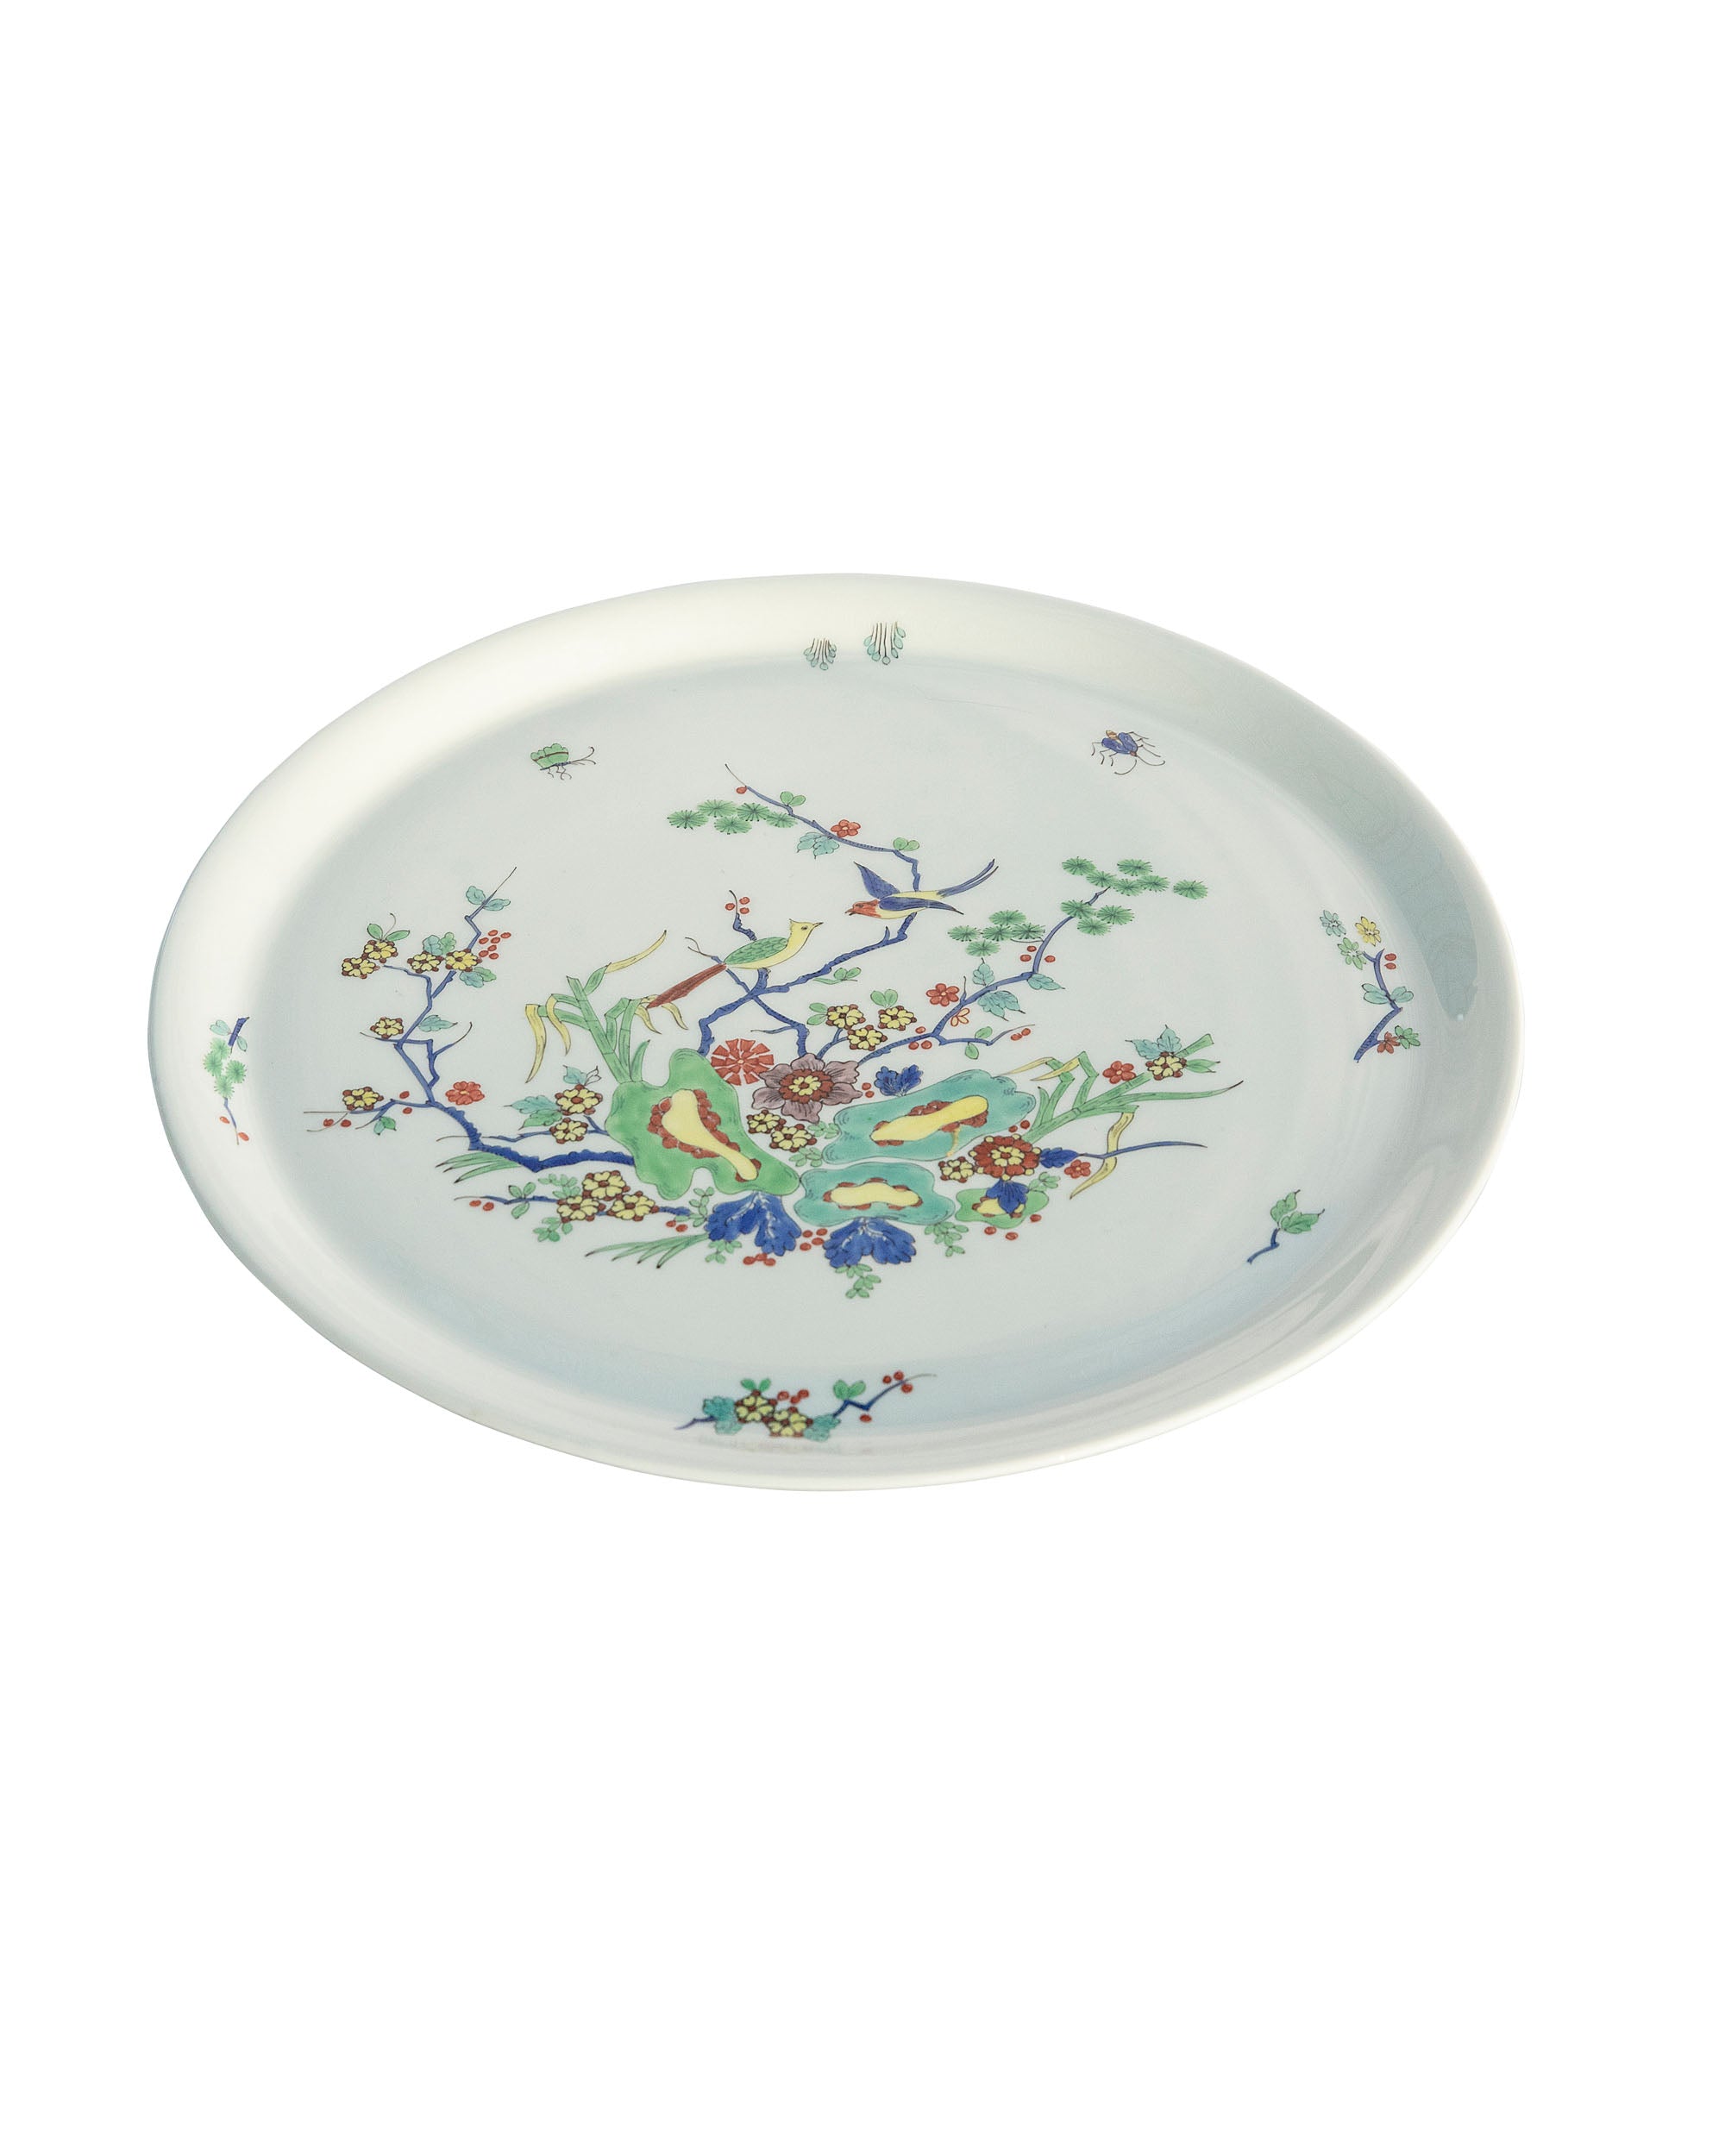 Round porcelain platter from Limoges decorated with birds and insects. France